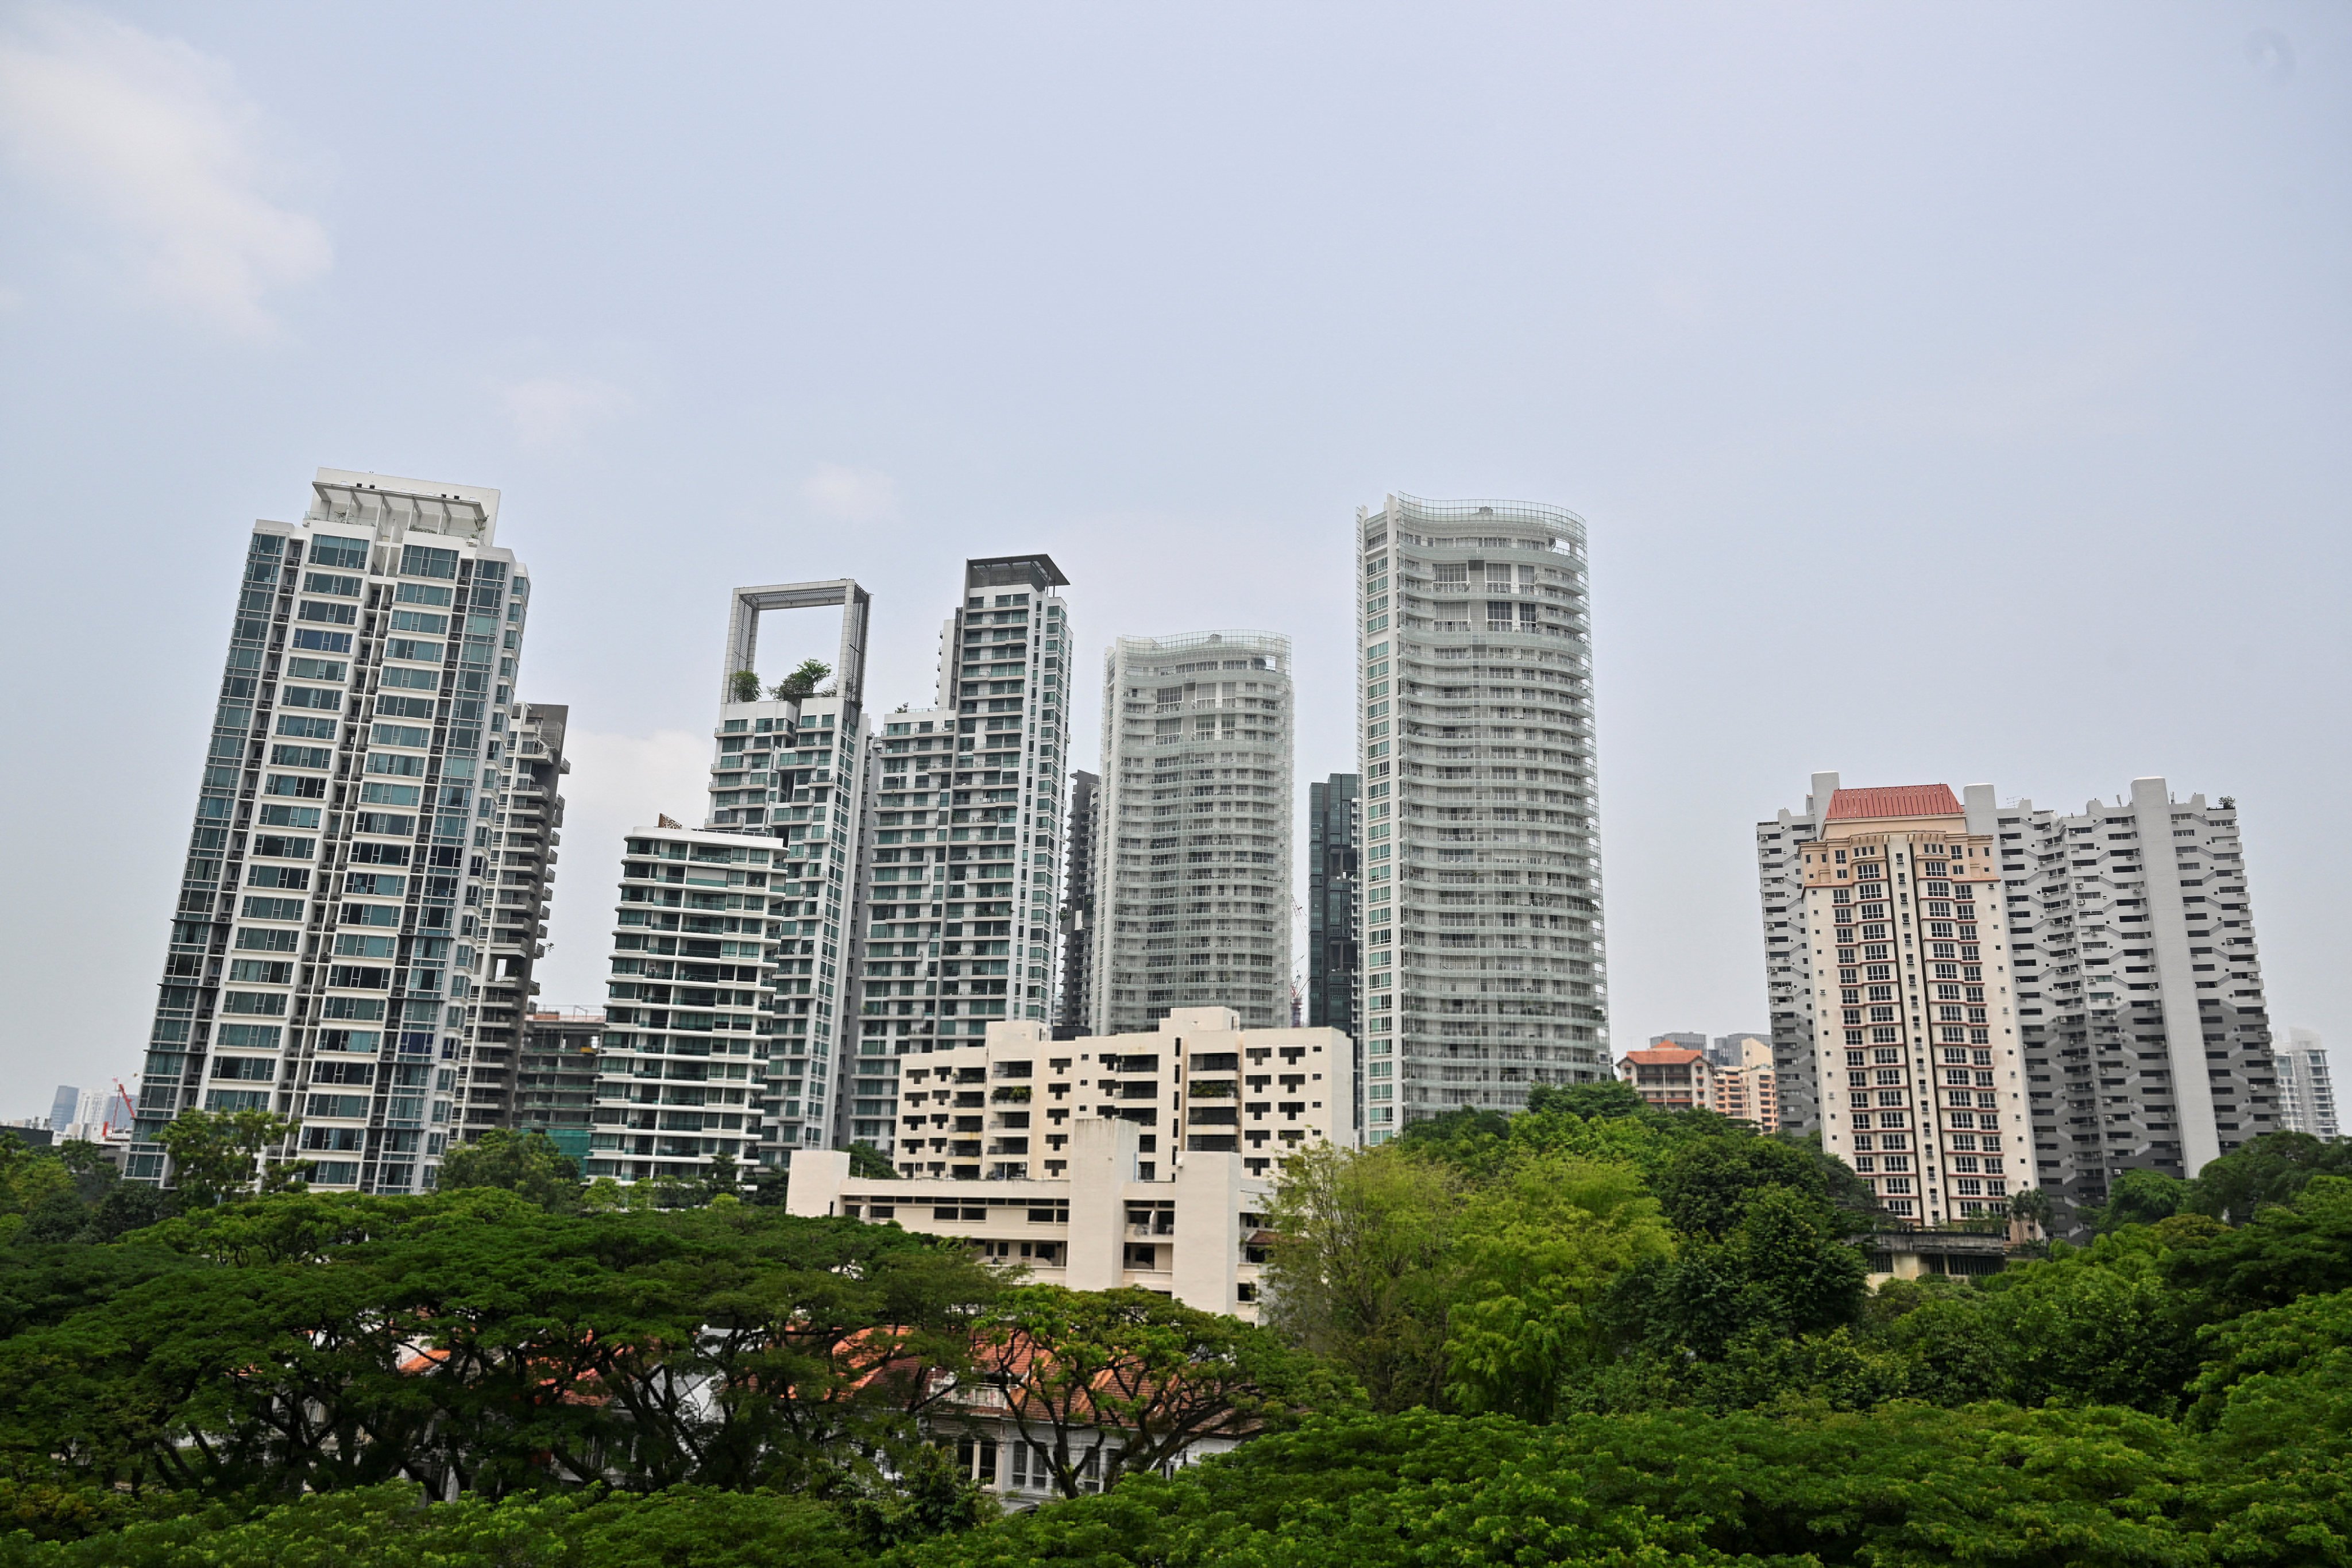 Singapore’s property sector has remained red-hot in part due to cash inflows from China and elsewhere, as investors bet on Singapore’s safe haven status. Photo: Reuters